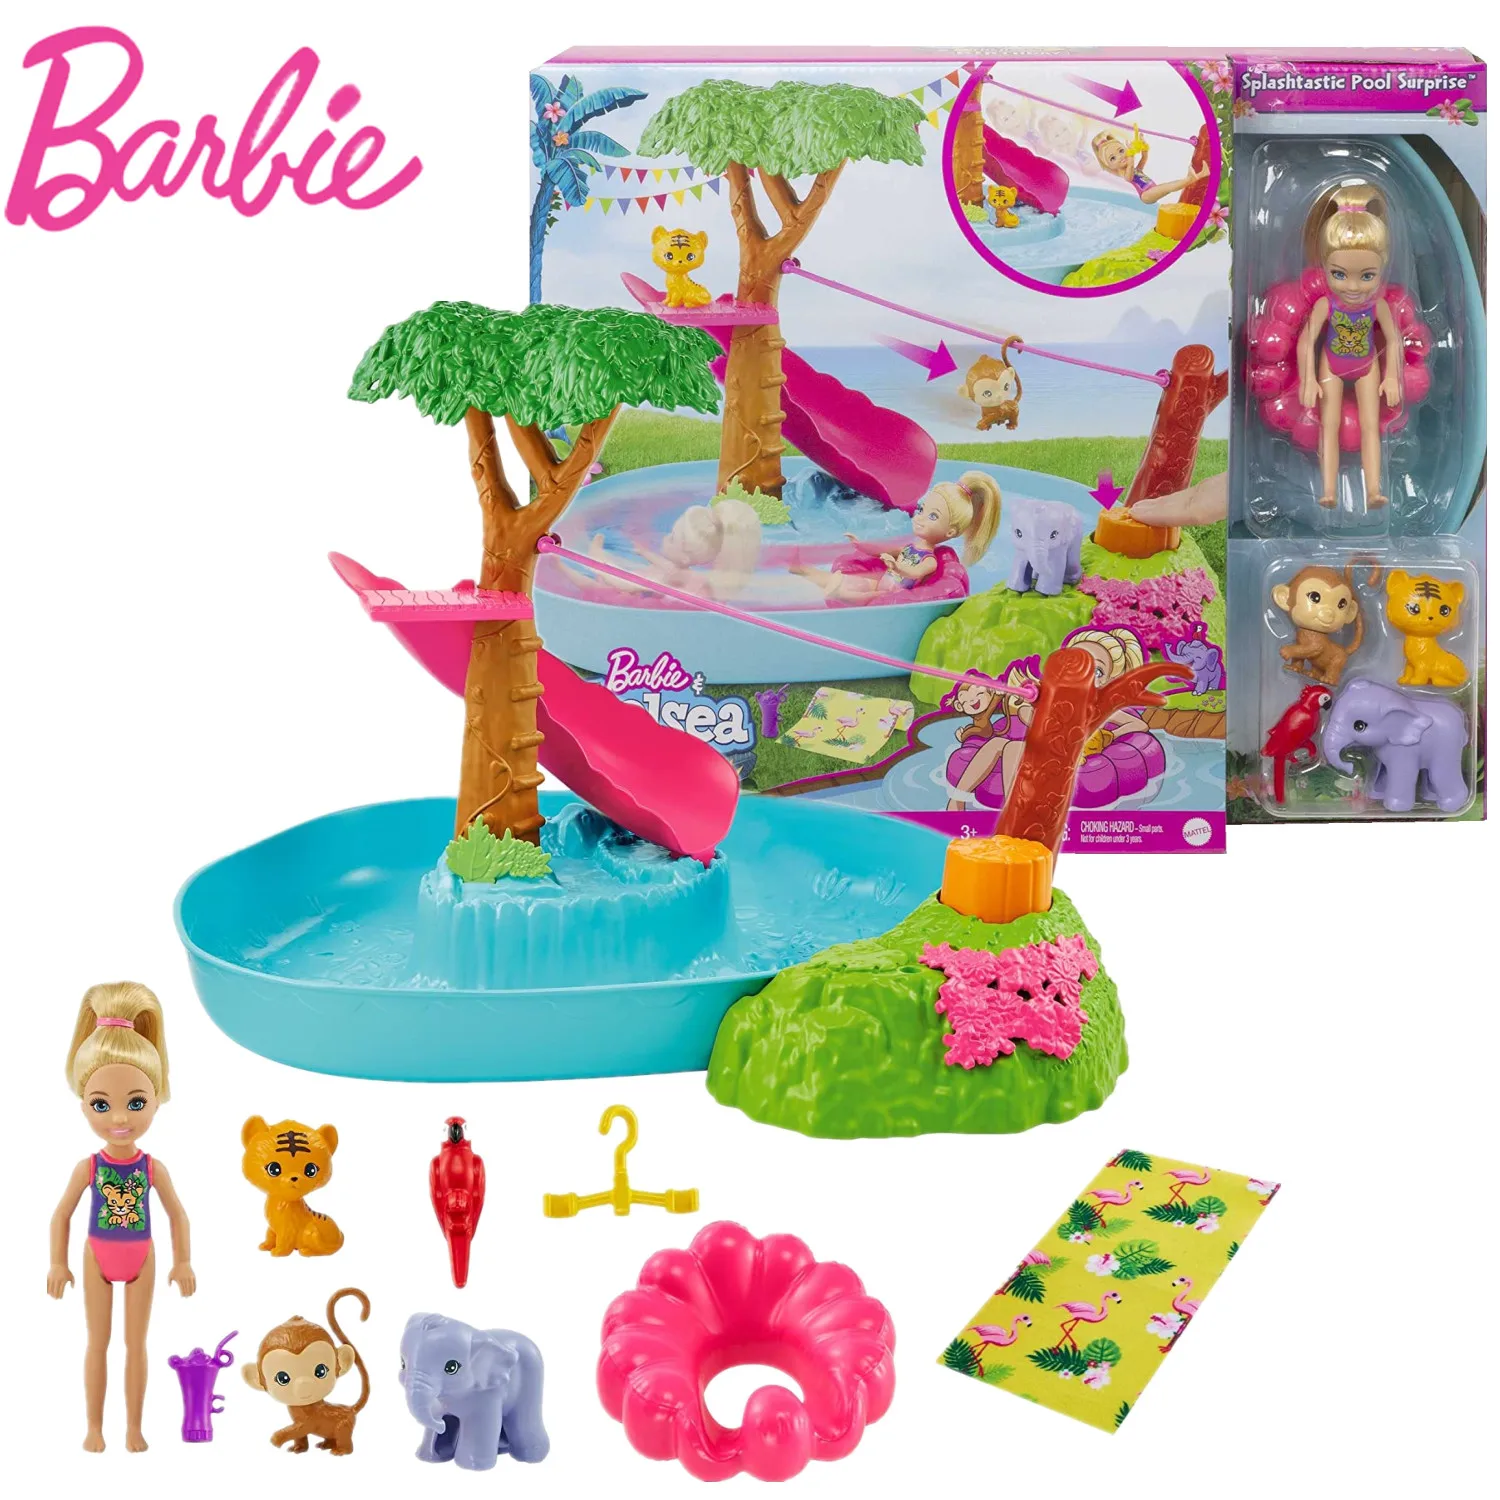 

Barbie Chelsea Doll The Lost Birthday Barbie and Chelsea Pool Party Playset Play House Dolls Scene Set Toy for Girl Gift GTM85